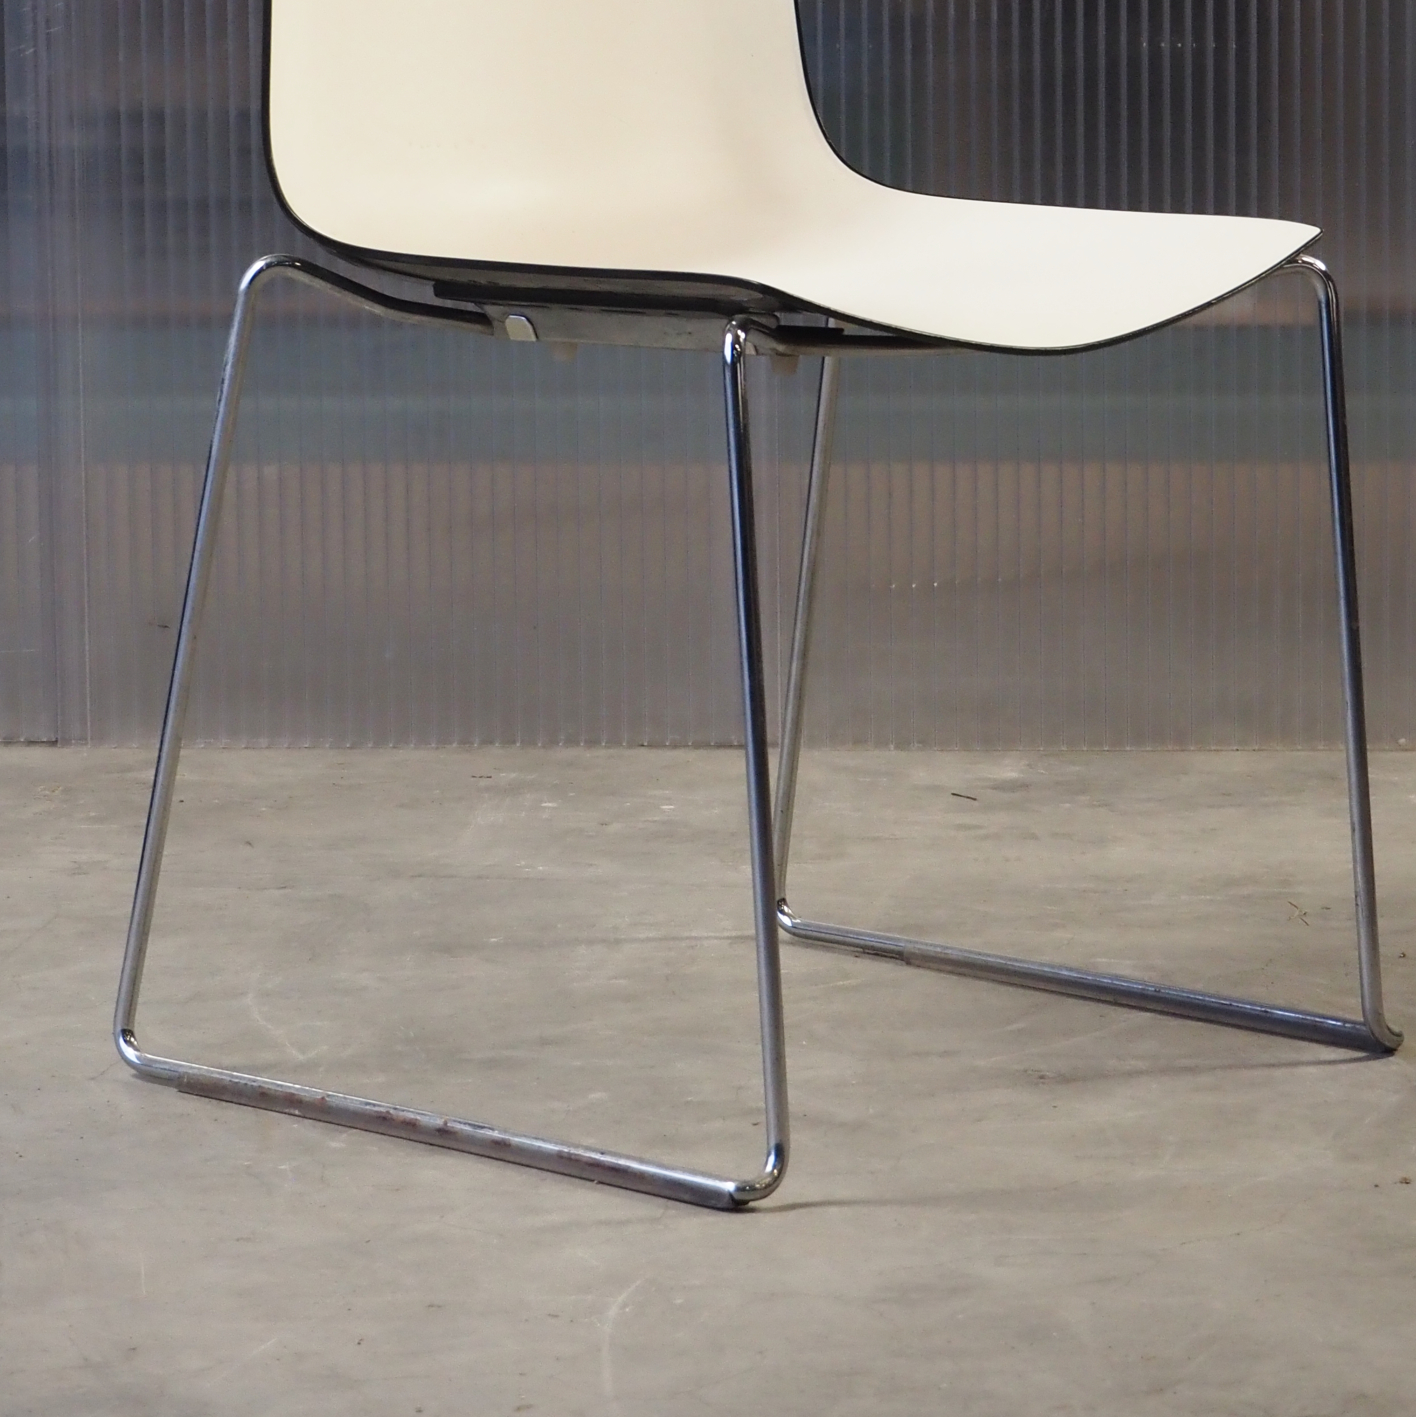 Stackable chair 'Catifa 46' by Lievore Altherr Molina for Arper (ca. 2004) - Black